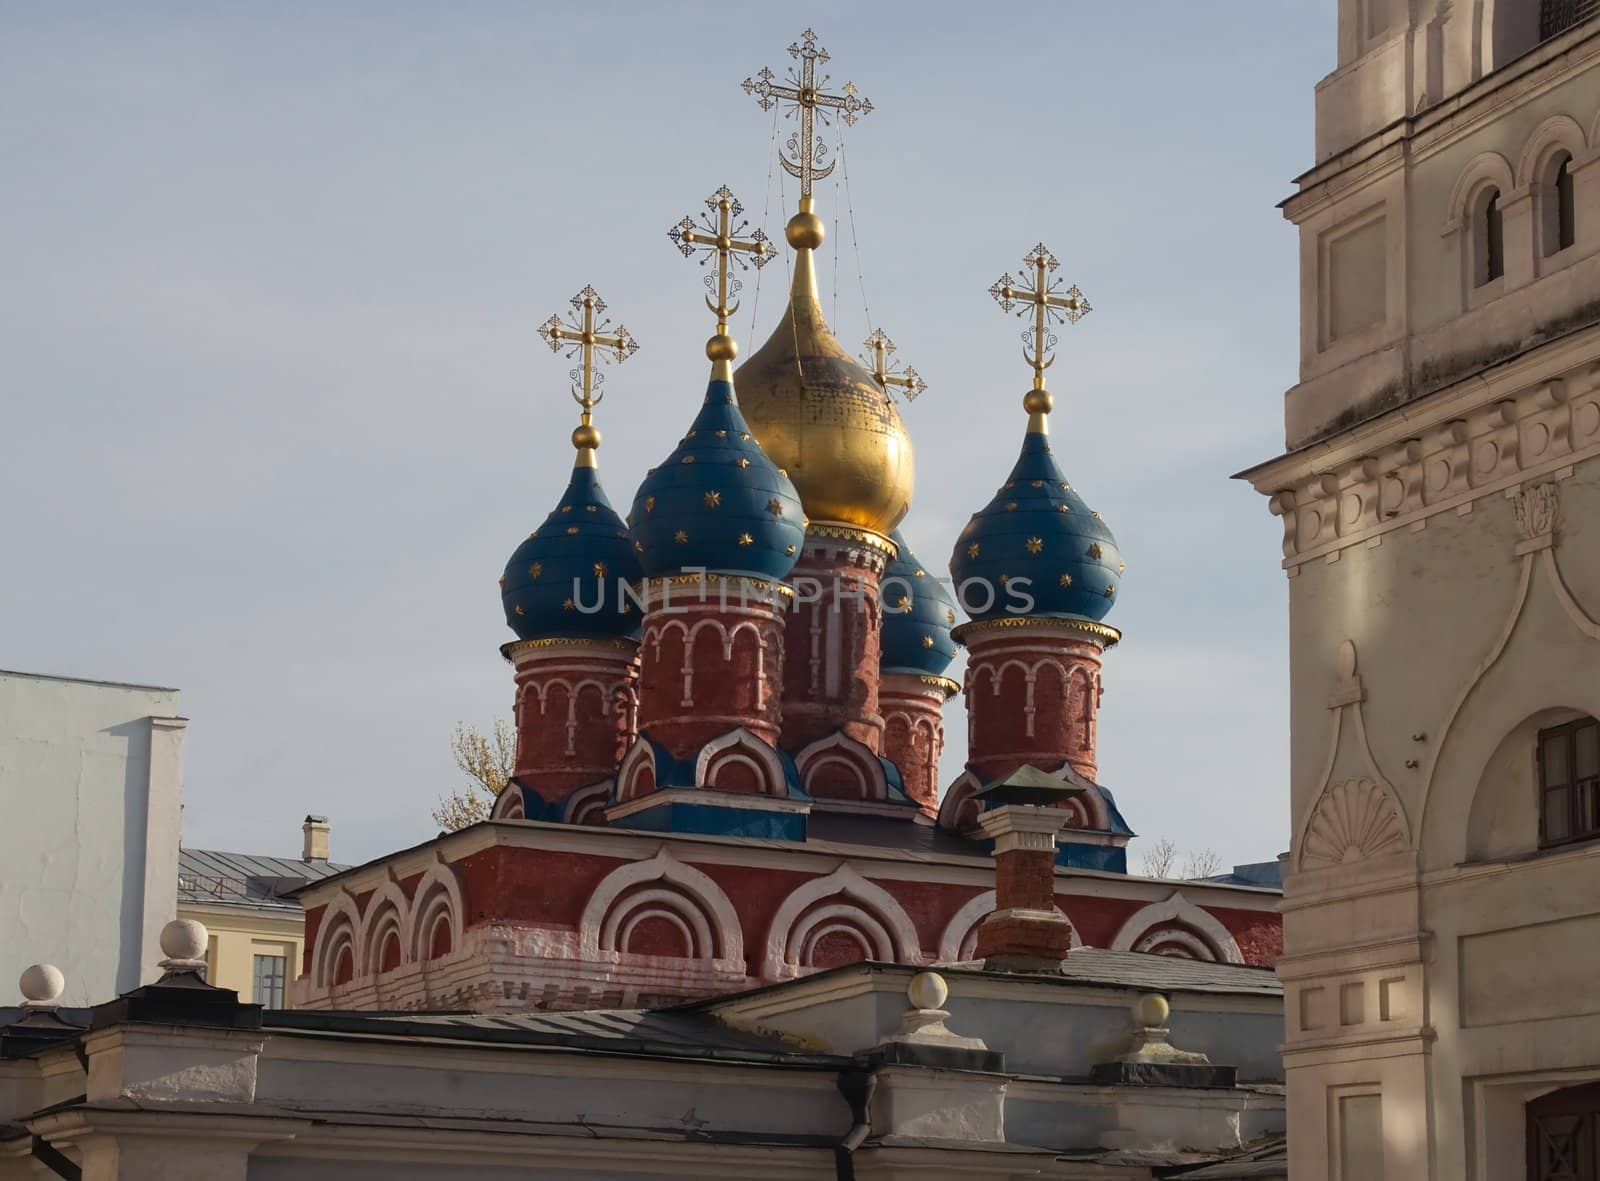 The dome of the temple in Moscow